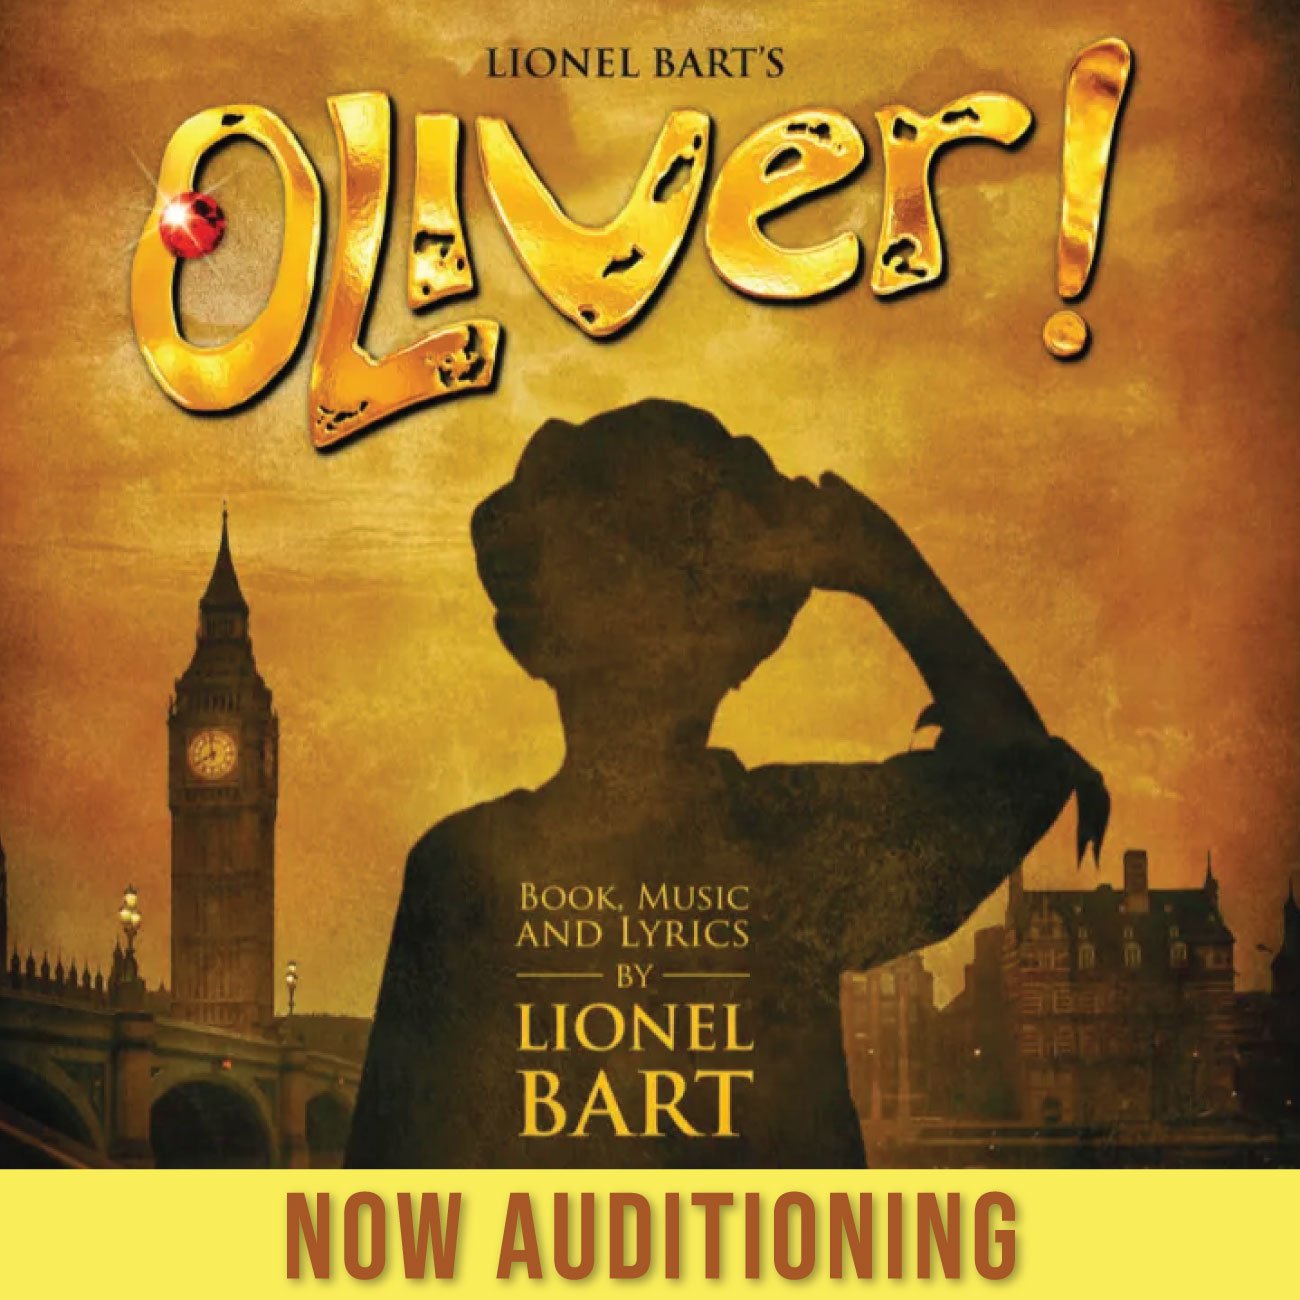 🎶 🎭 Don't forget about auditions for the upcoming production of Oliver! Set to grace the stage this June in Hilton Head, this award-winning musical promises to captivate audiences with its unforgettable characters and timeless songs. All ages welco